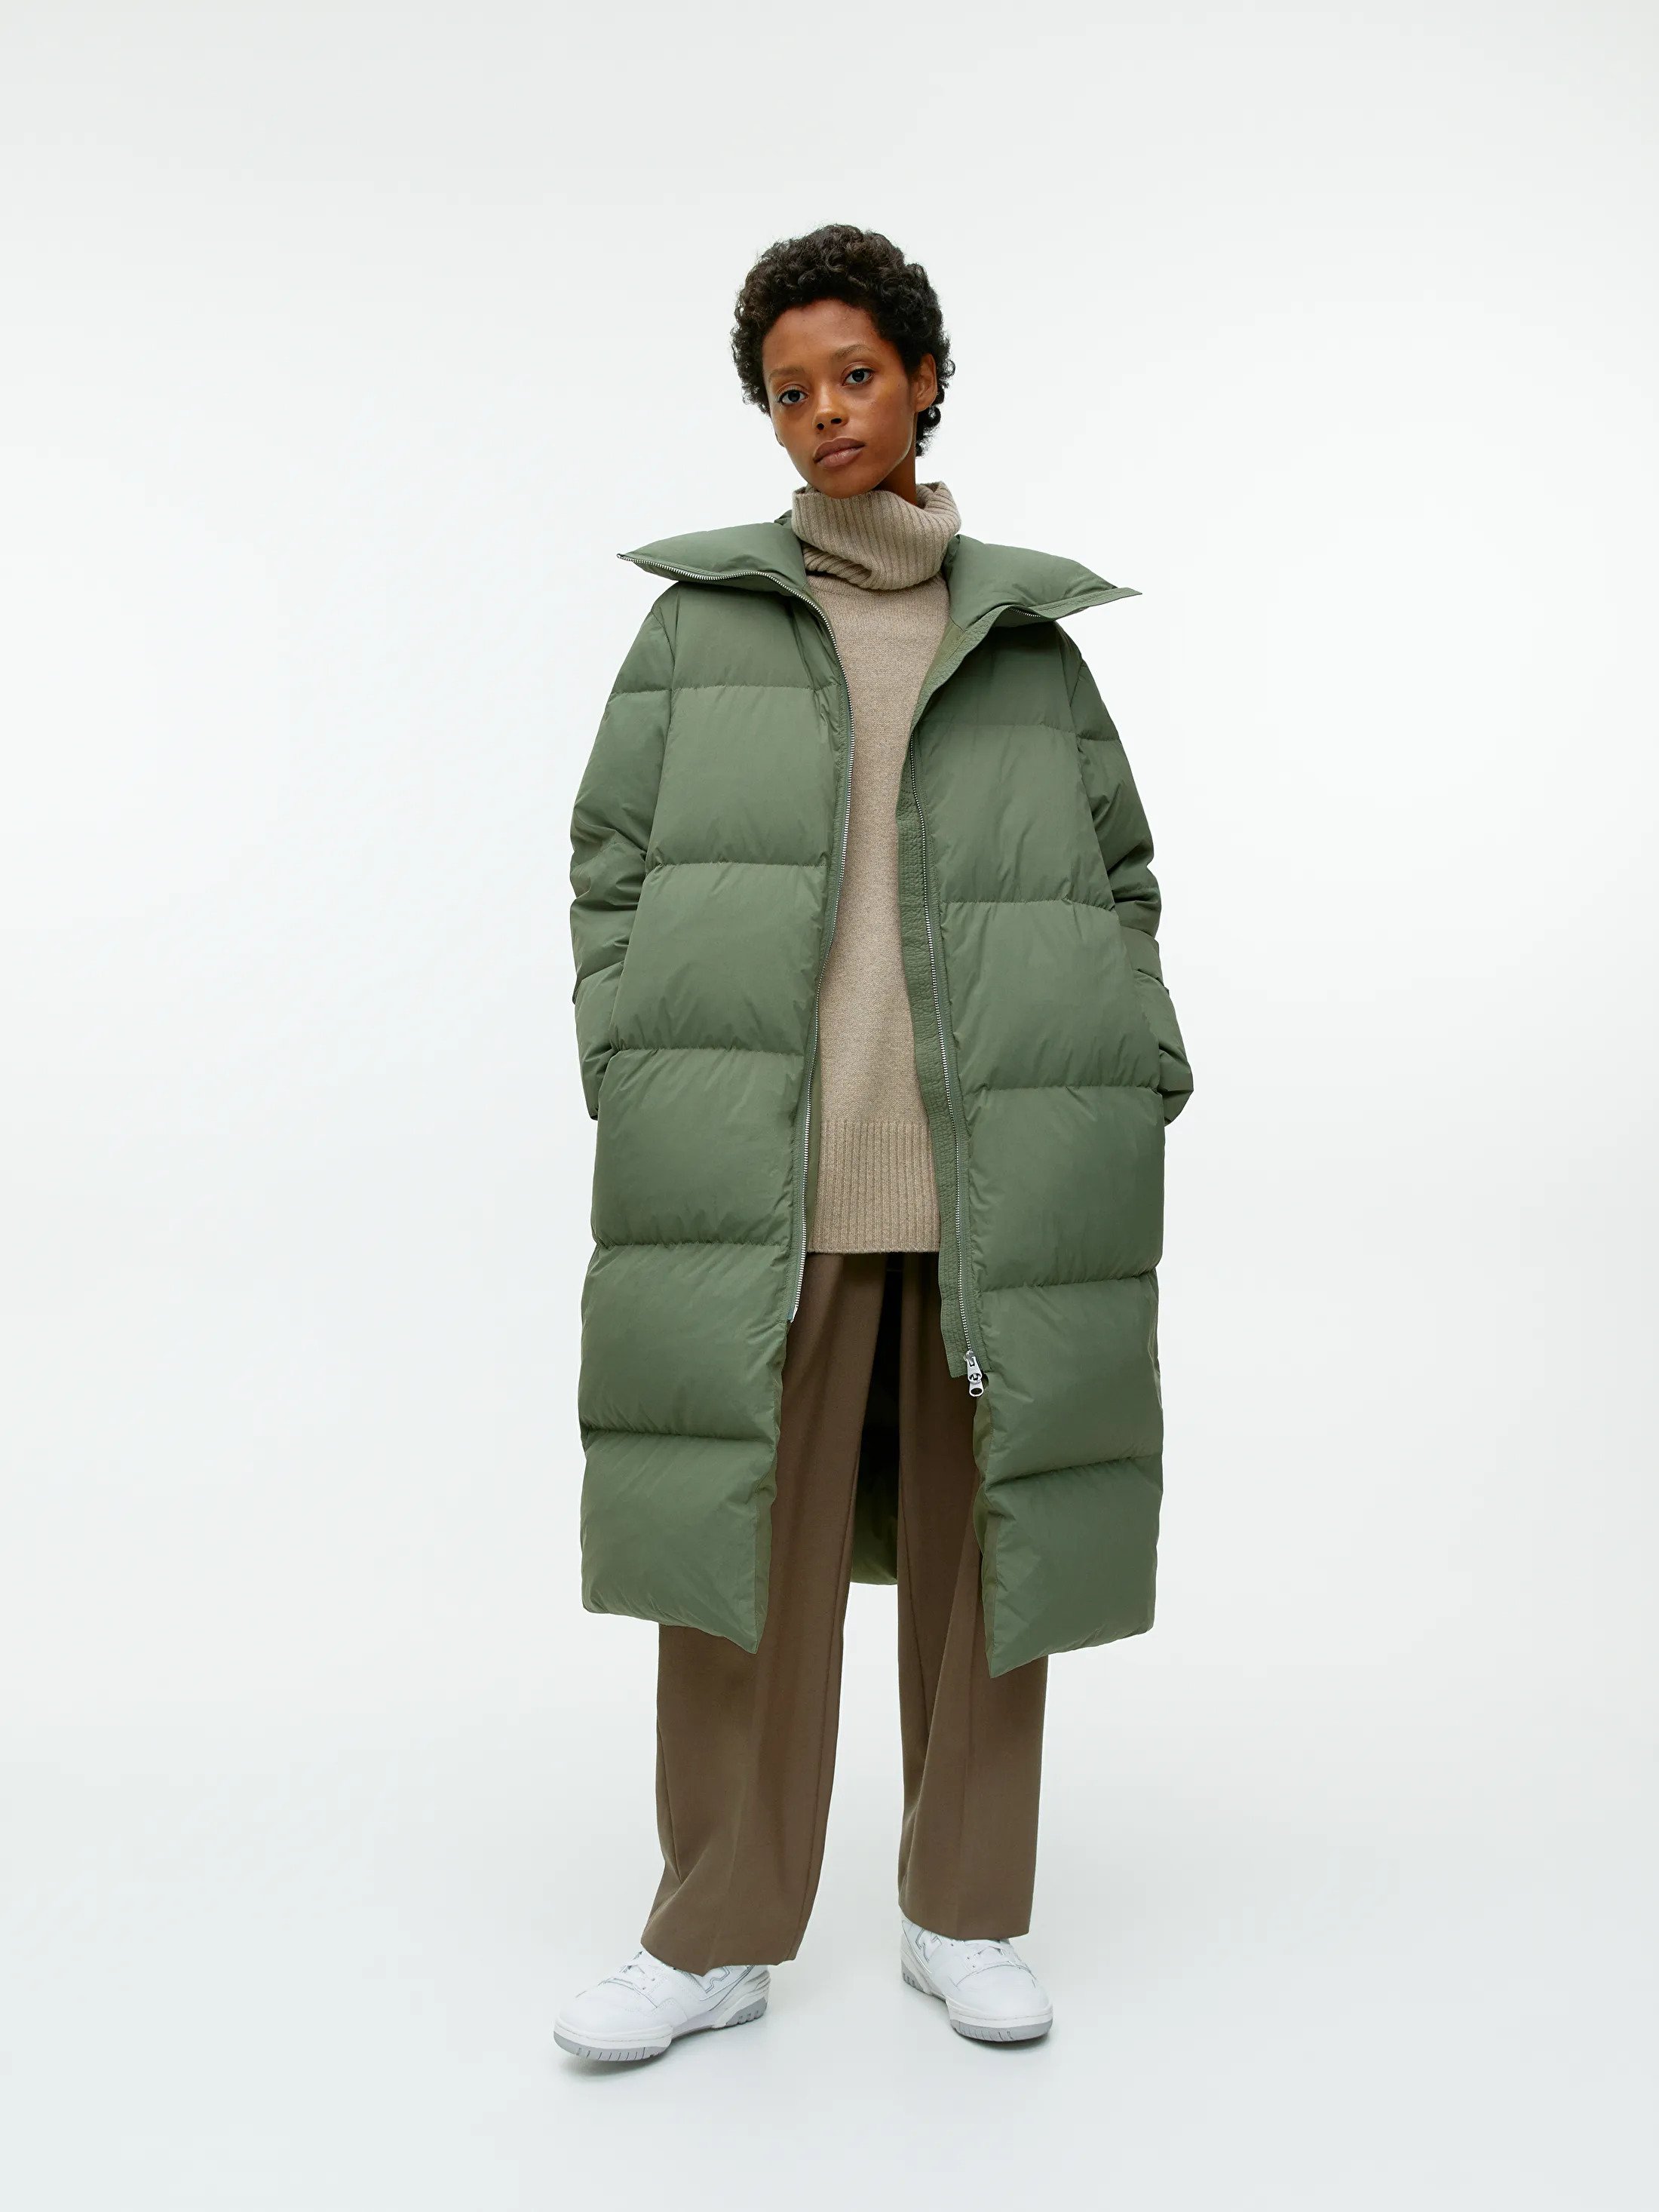 Arket's Puffer Coats Are Back in Stock and Trending Again | Who What Wear